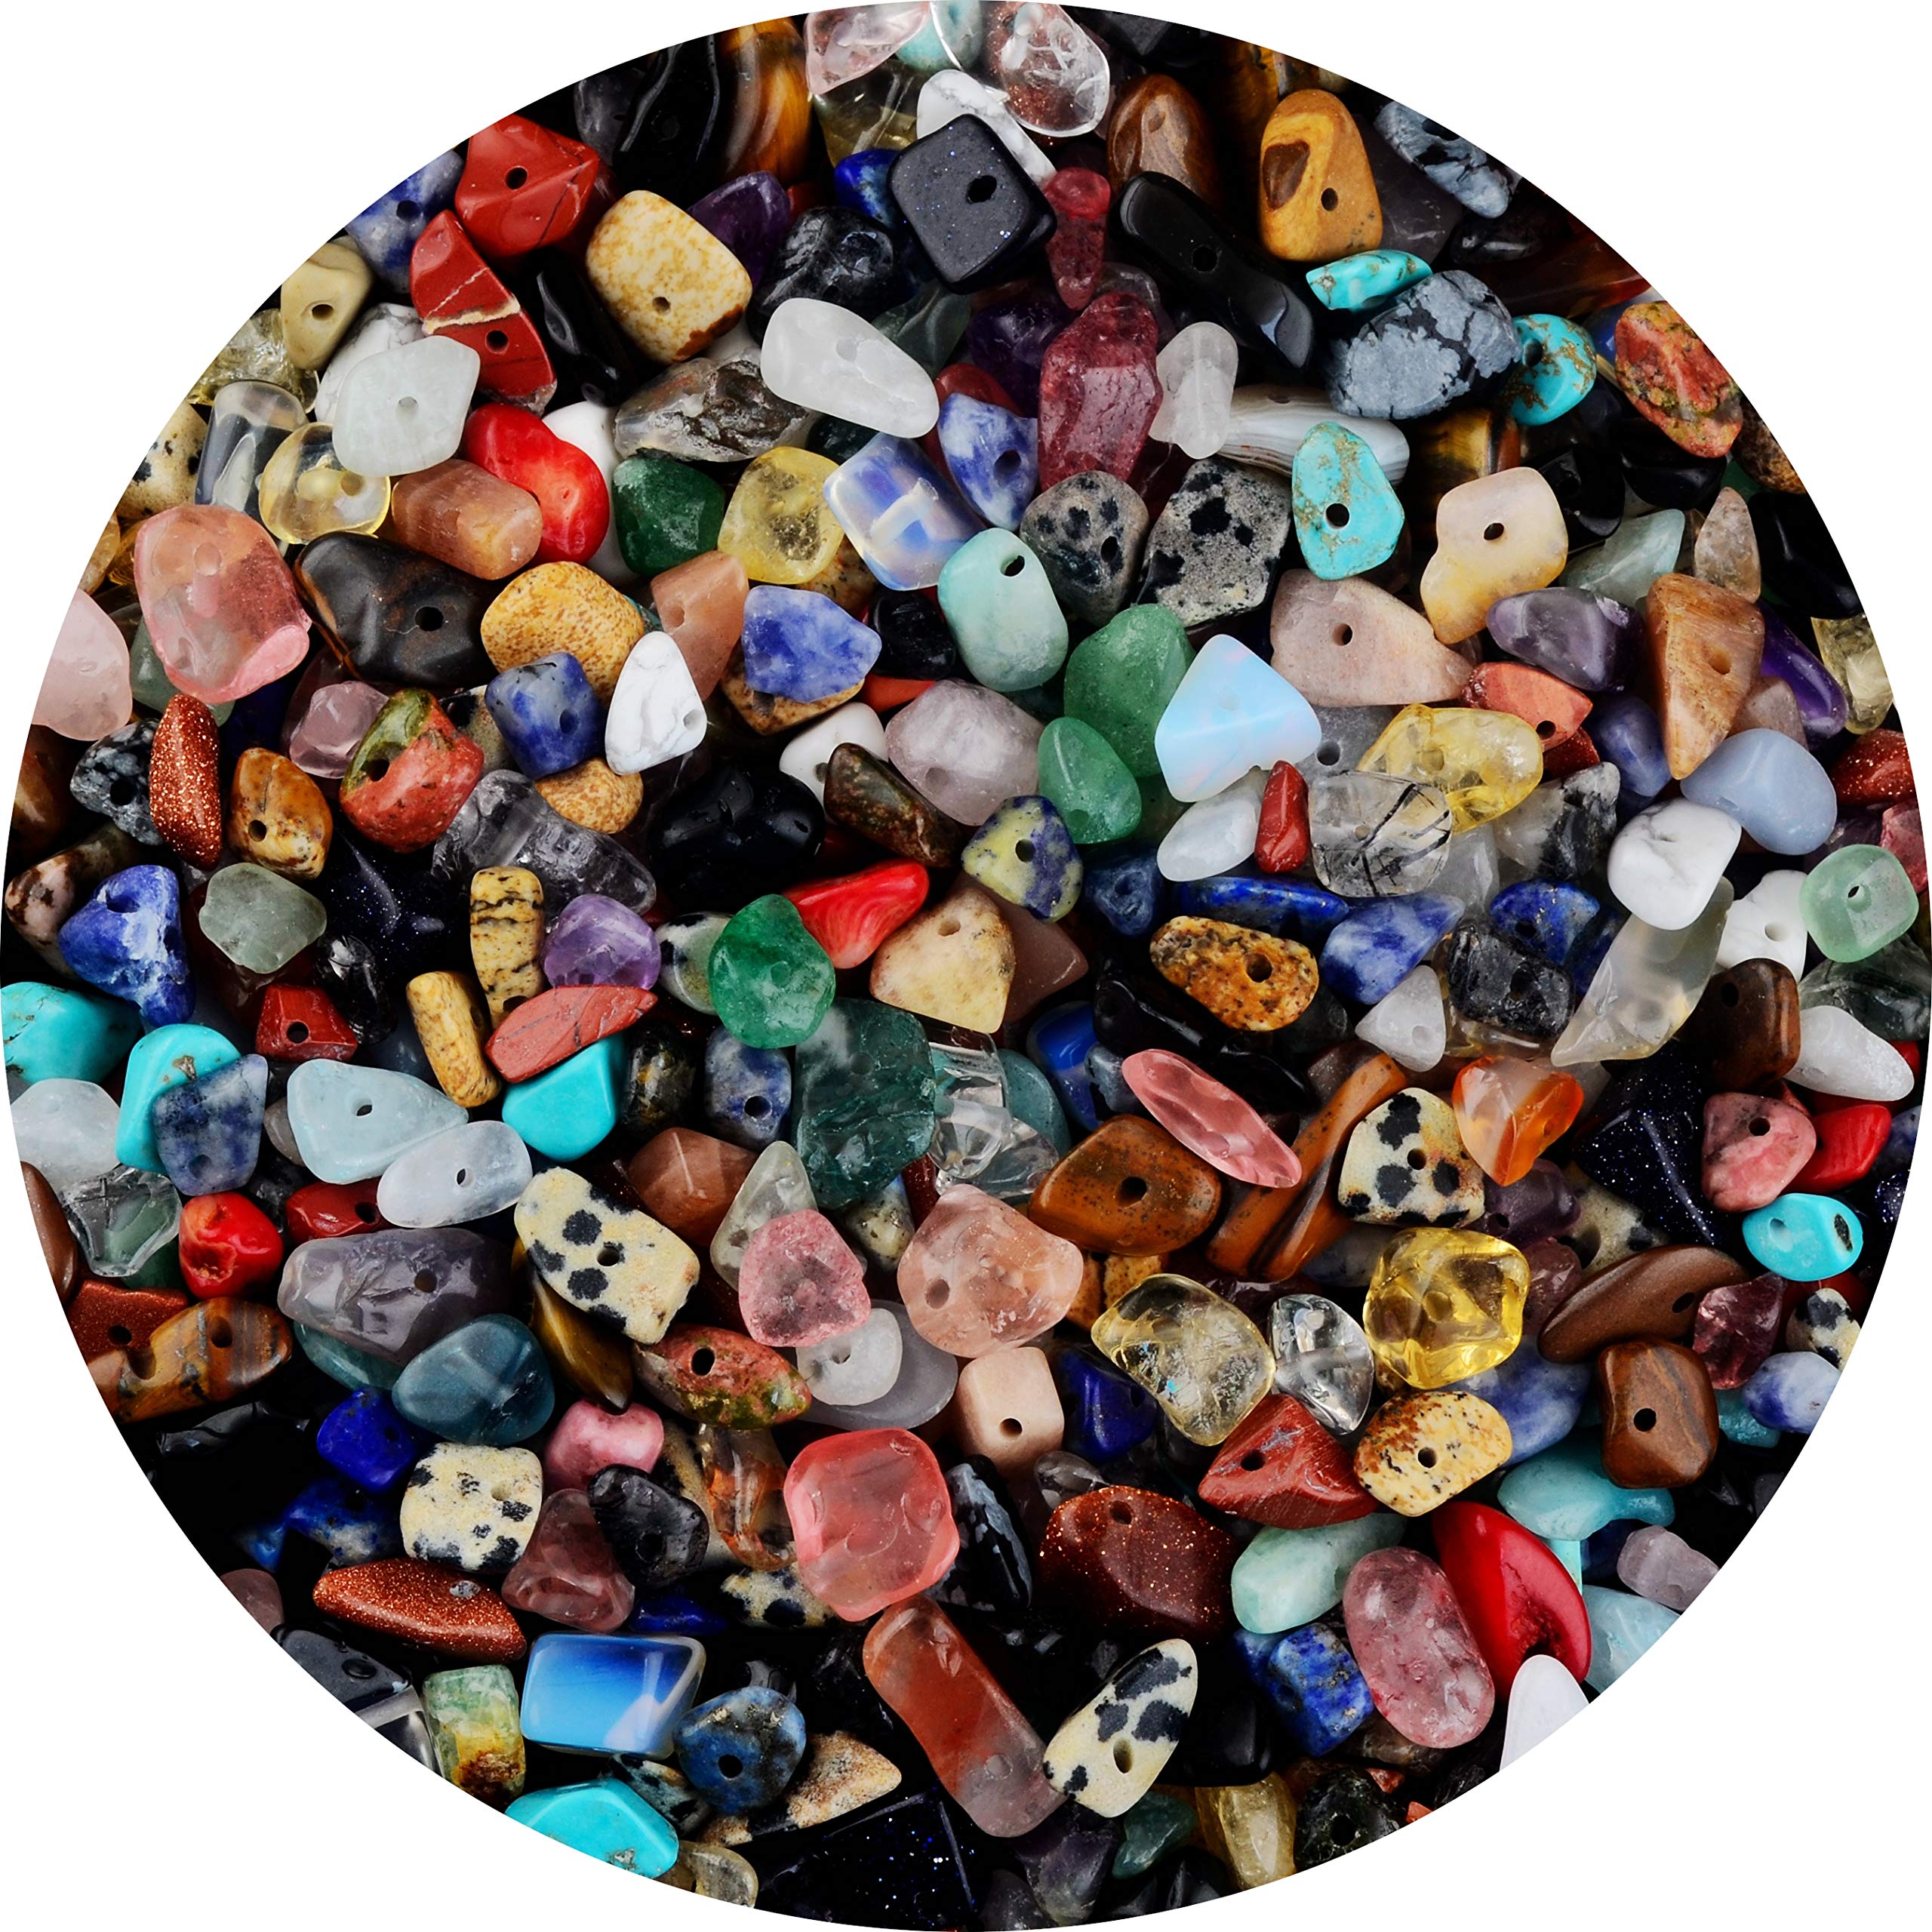 Natural Chip Stone Beads Multicolor 5-8mm About 400 Pieces